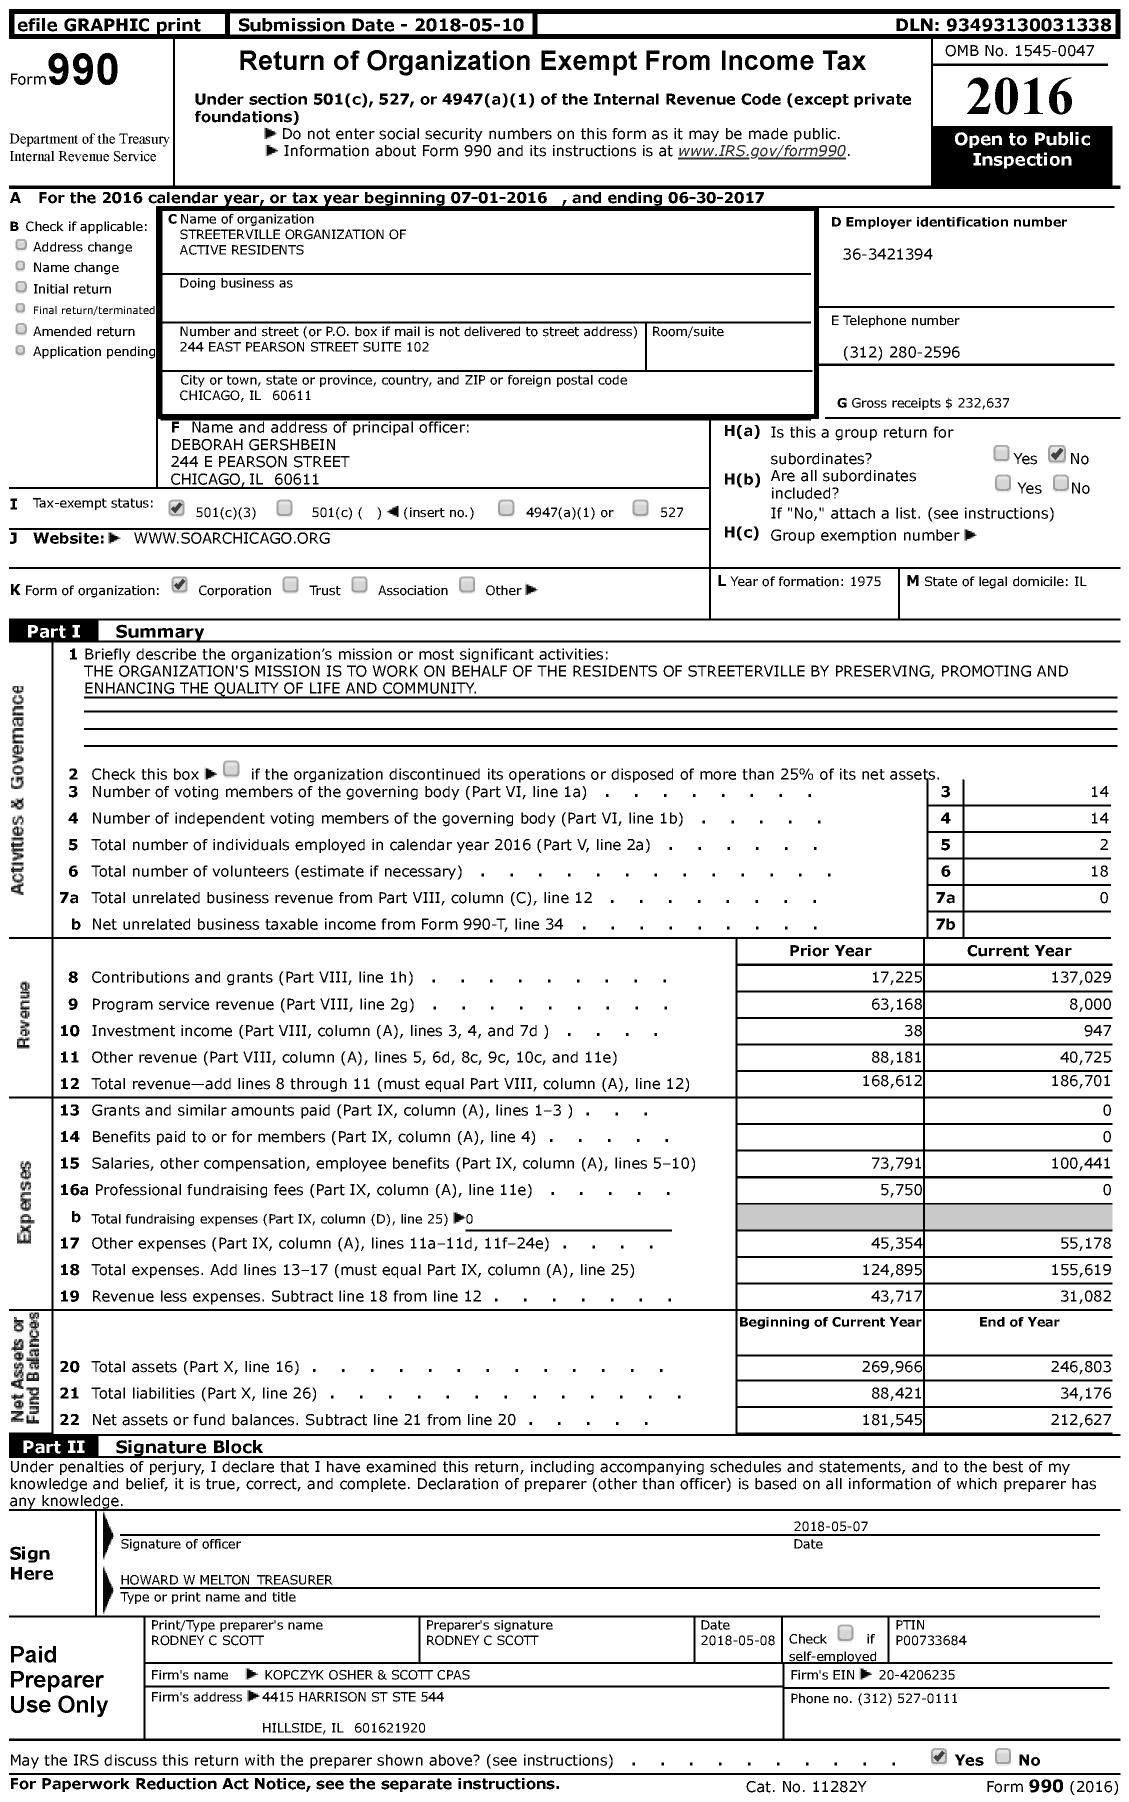 Image of first page of 2016 Form 990 for Streeterville Organization of Active Residents